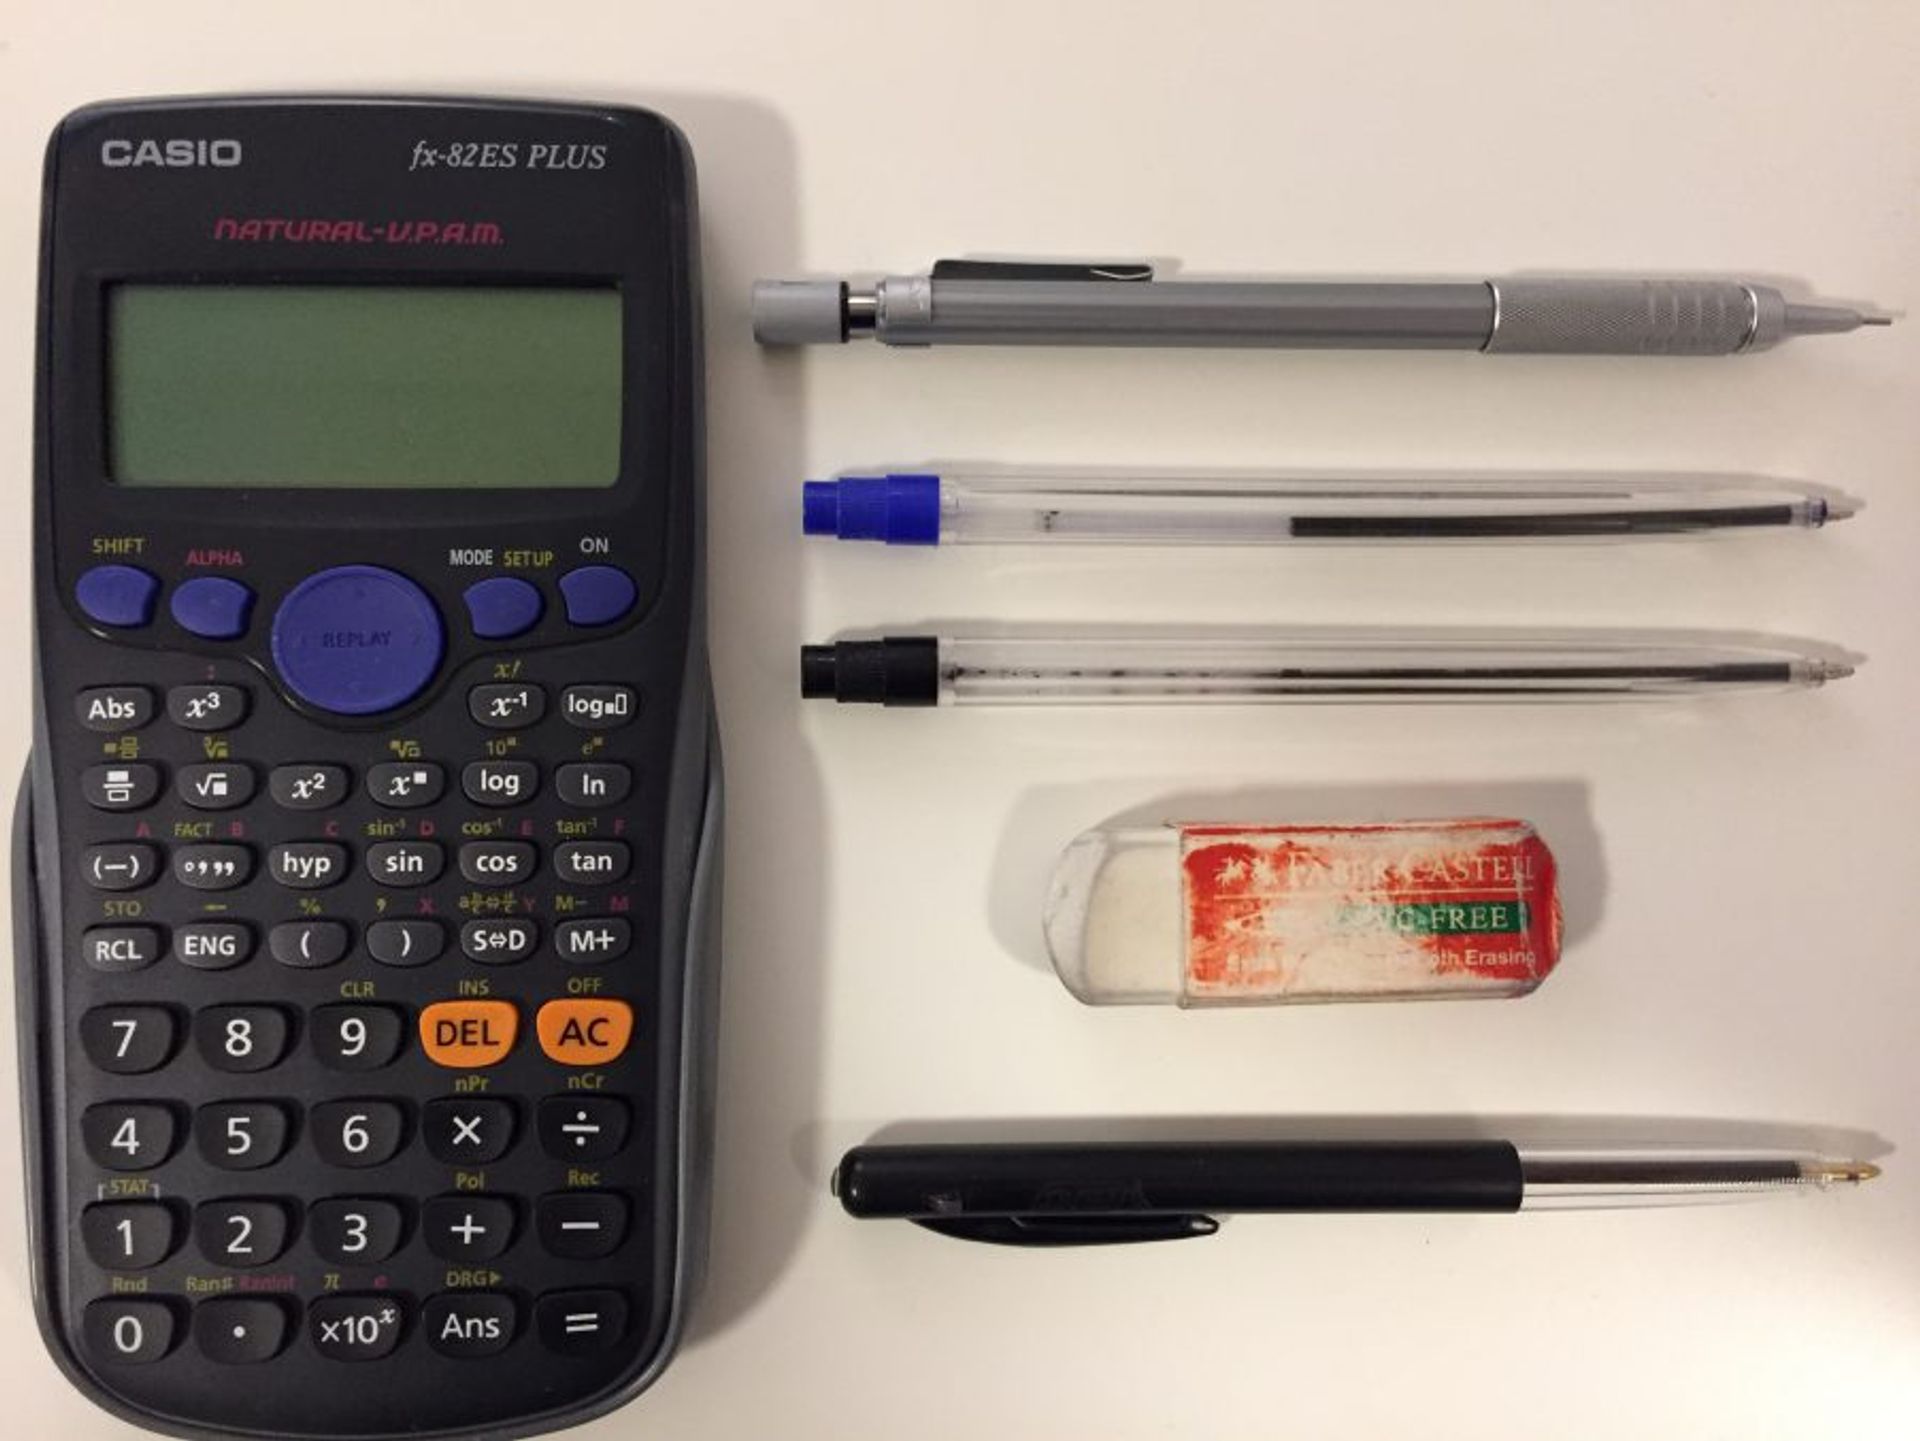 Four pens, an eraser and a calculator on a table.